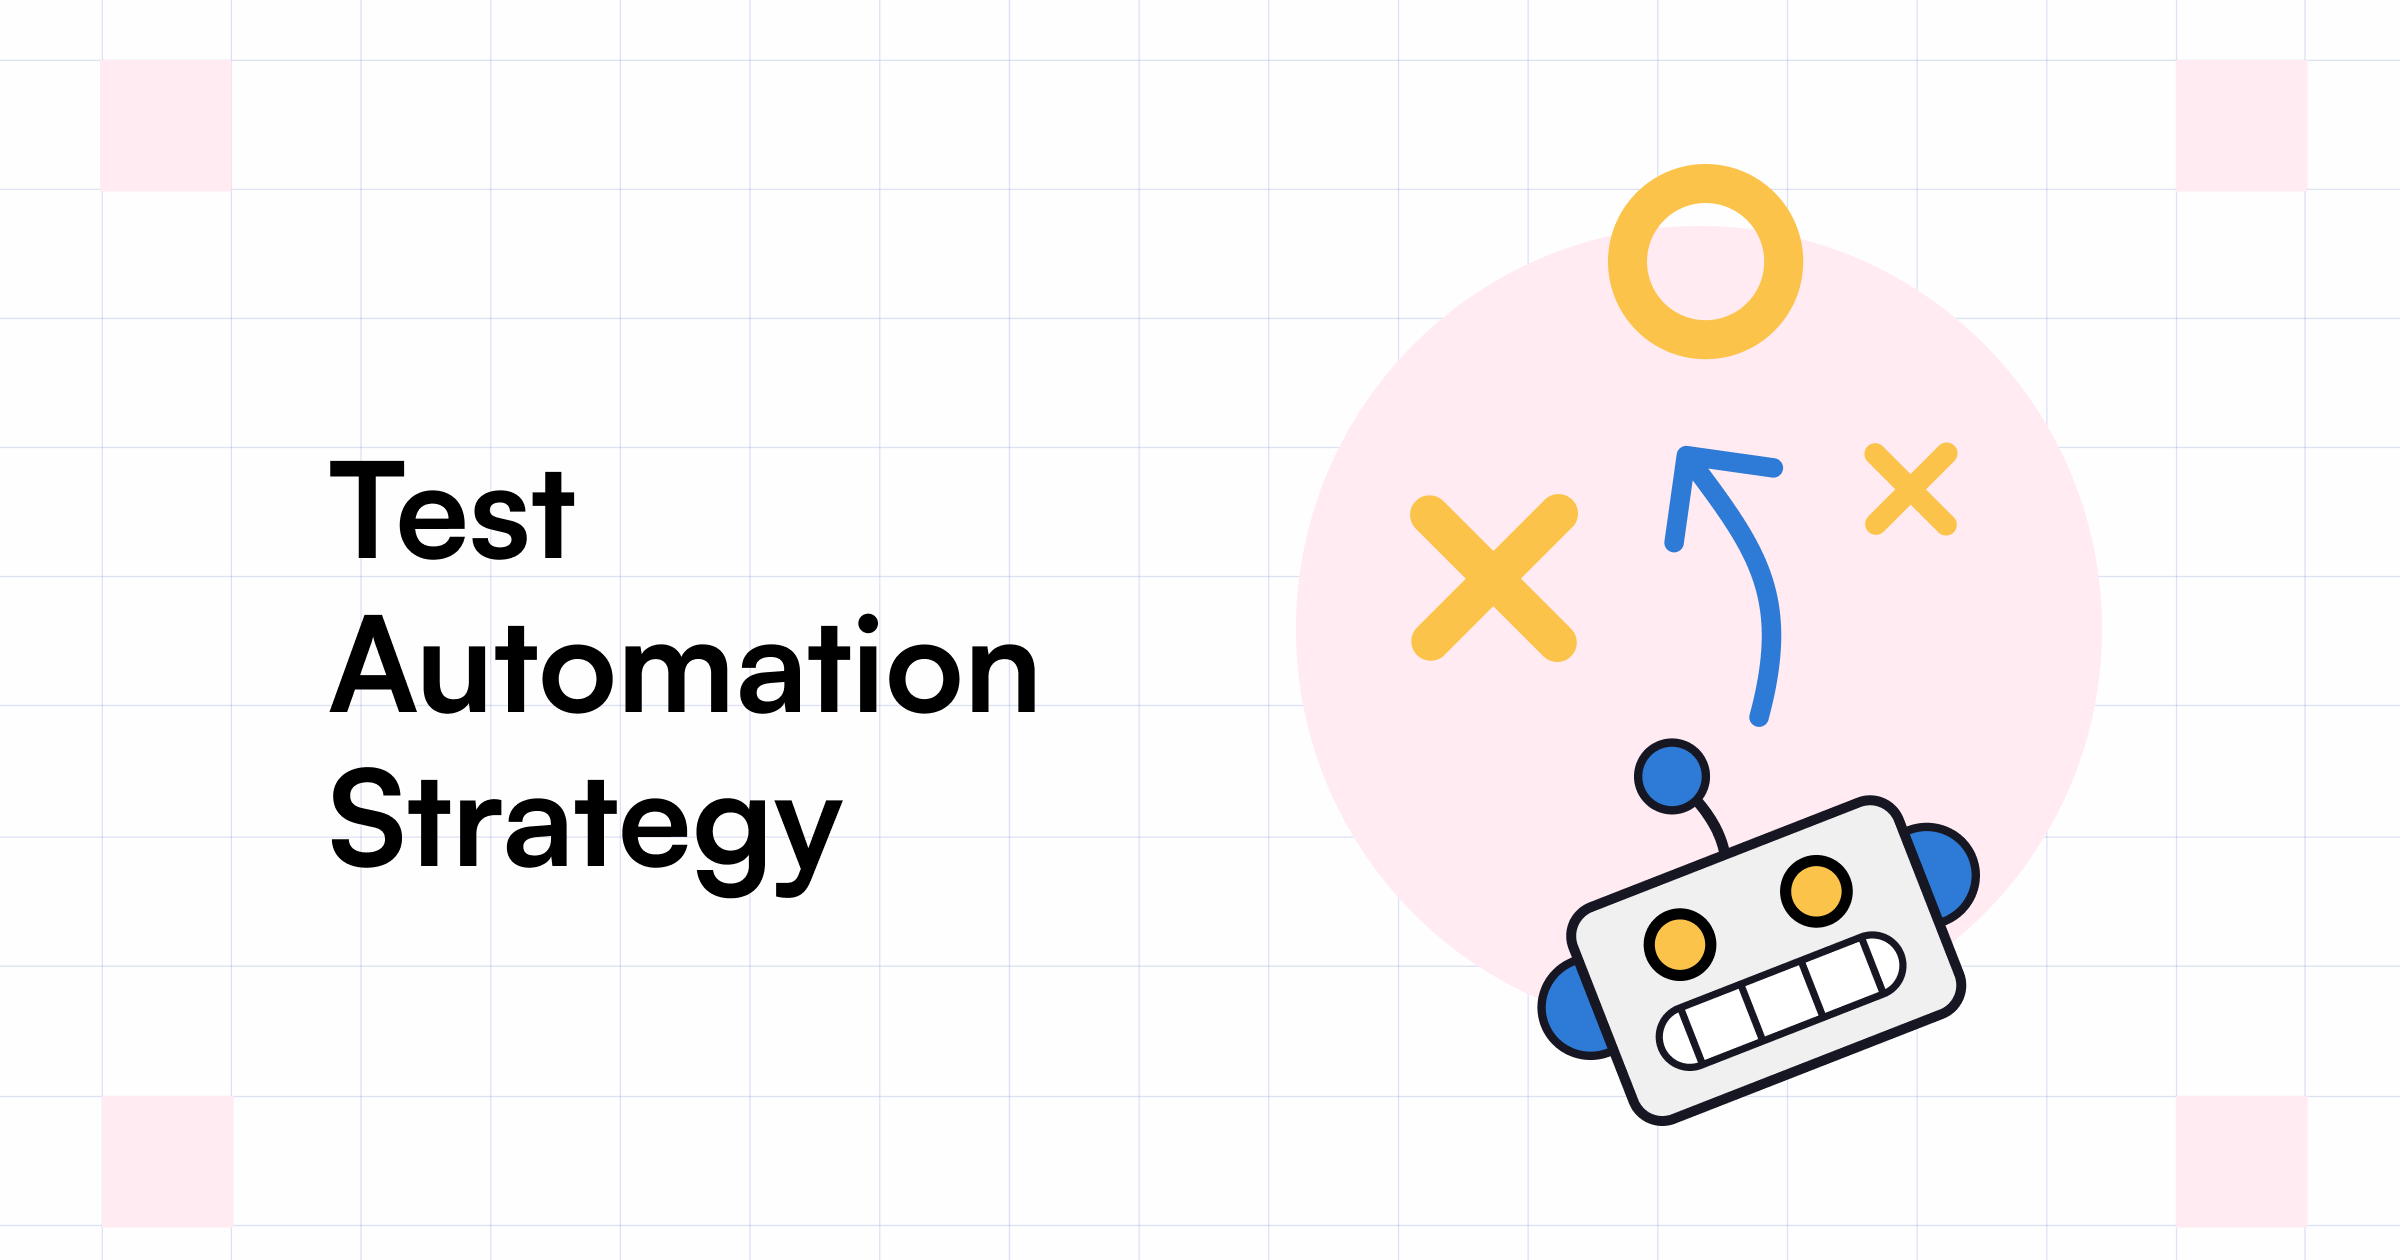 How To Build a Test Automation Strategy in Seven Simple Steps